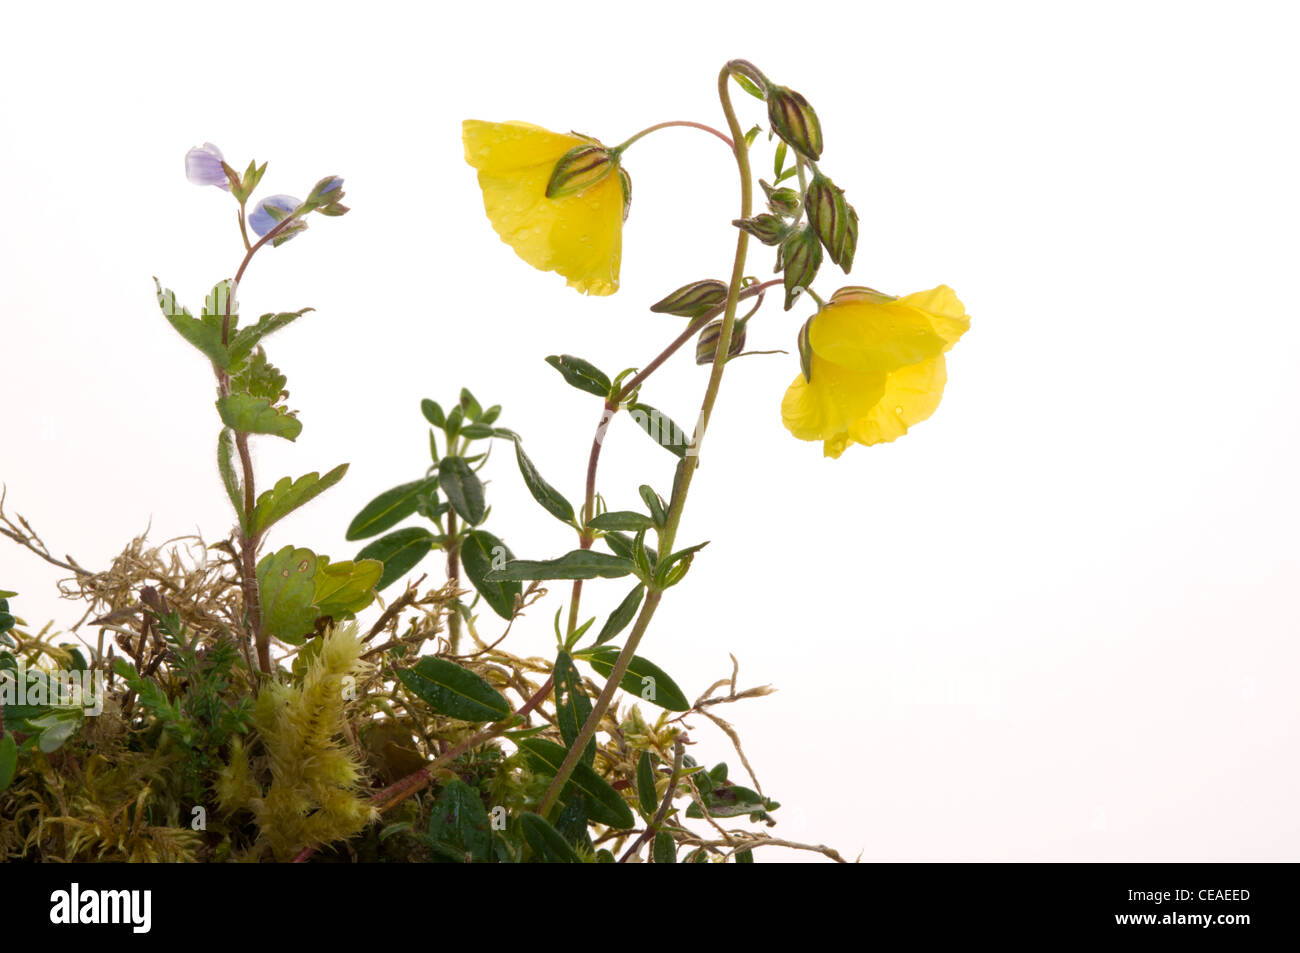 Common Rock Rose and Germander Speedwell Stock Photo